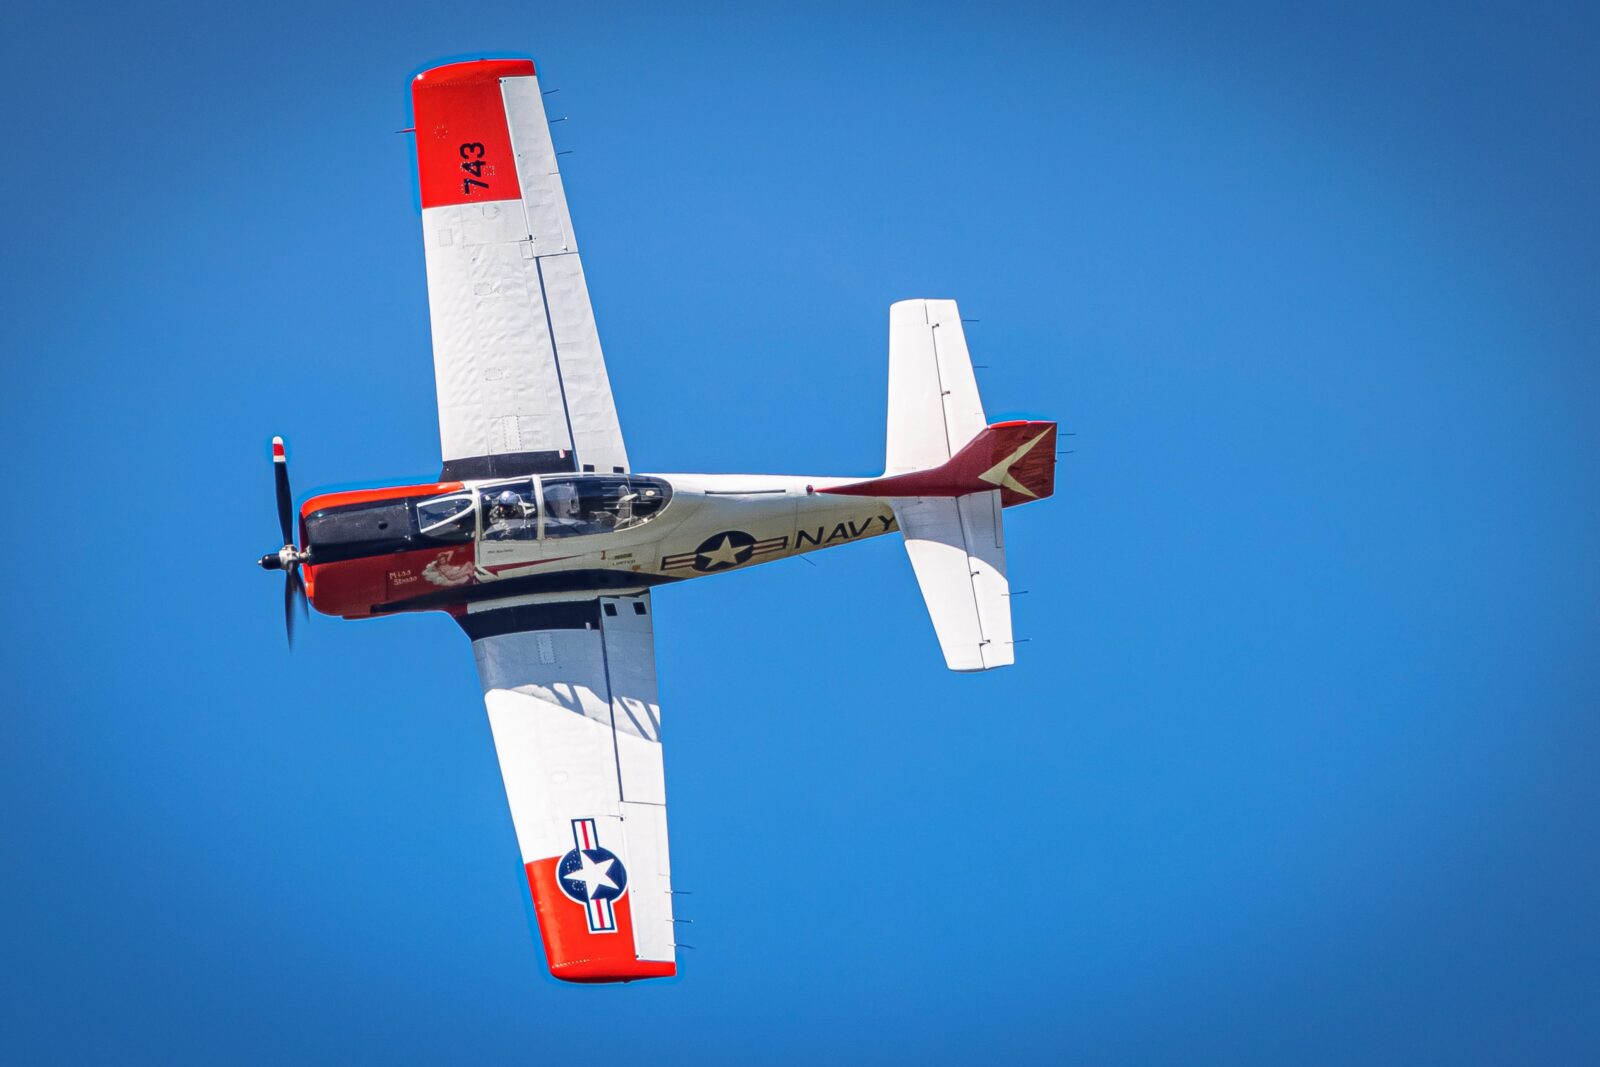 The Trojan is a powerful, high performance aircraft capable of aerobatics and high-speed flight.